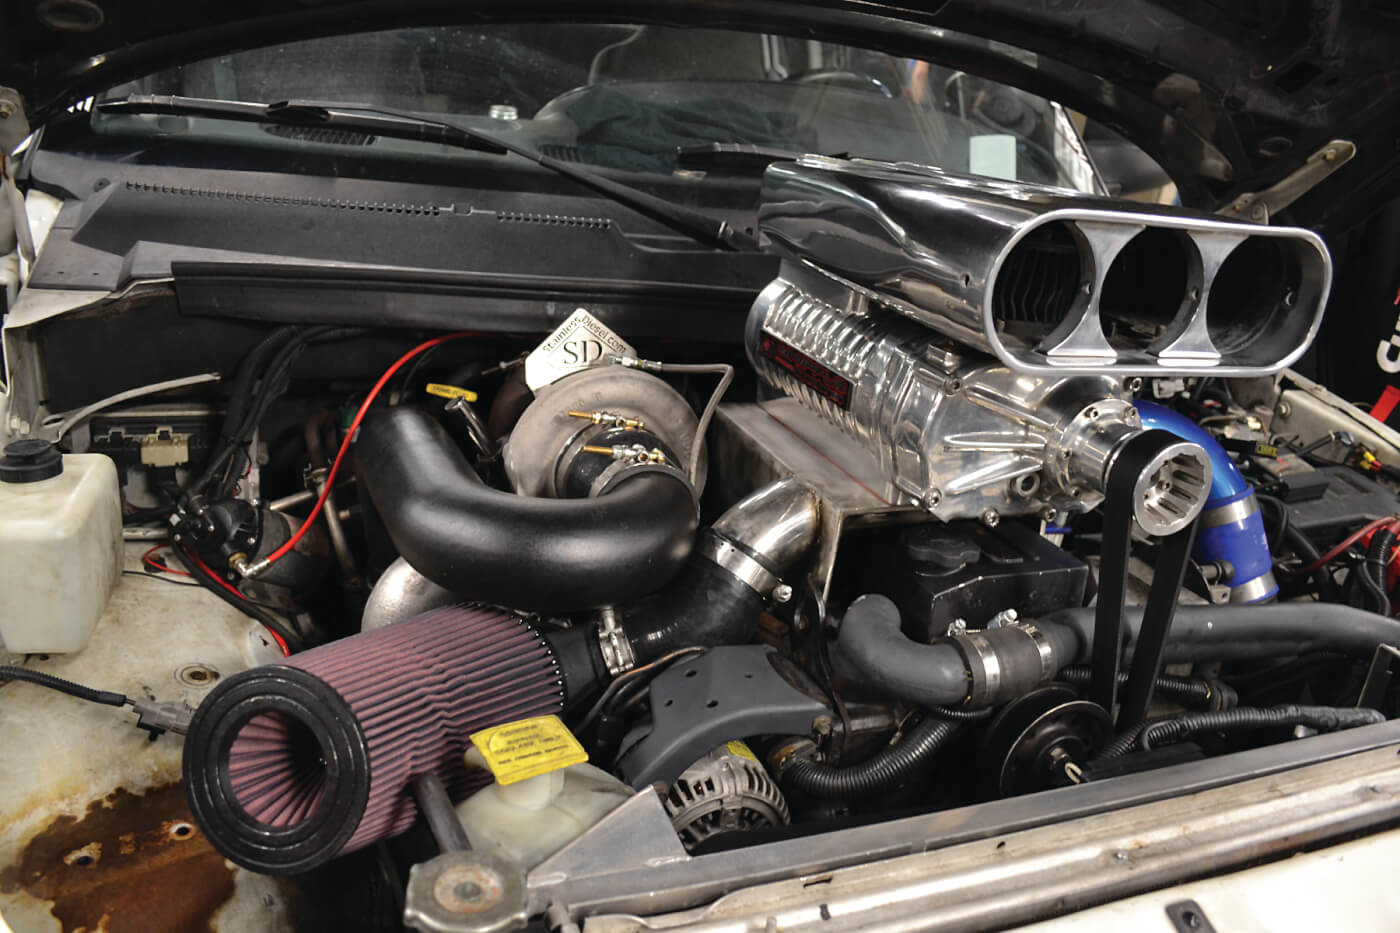 Probably the coolest engine bay at the event belonged to this supercharged, twin-turbo Dodge.